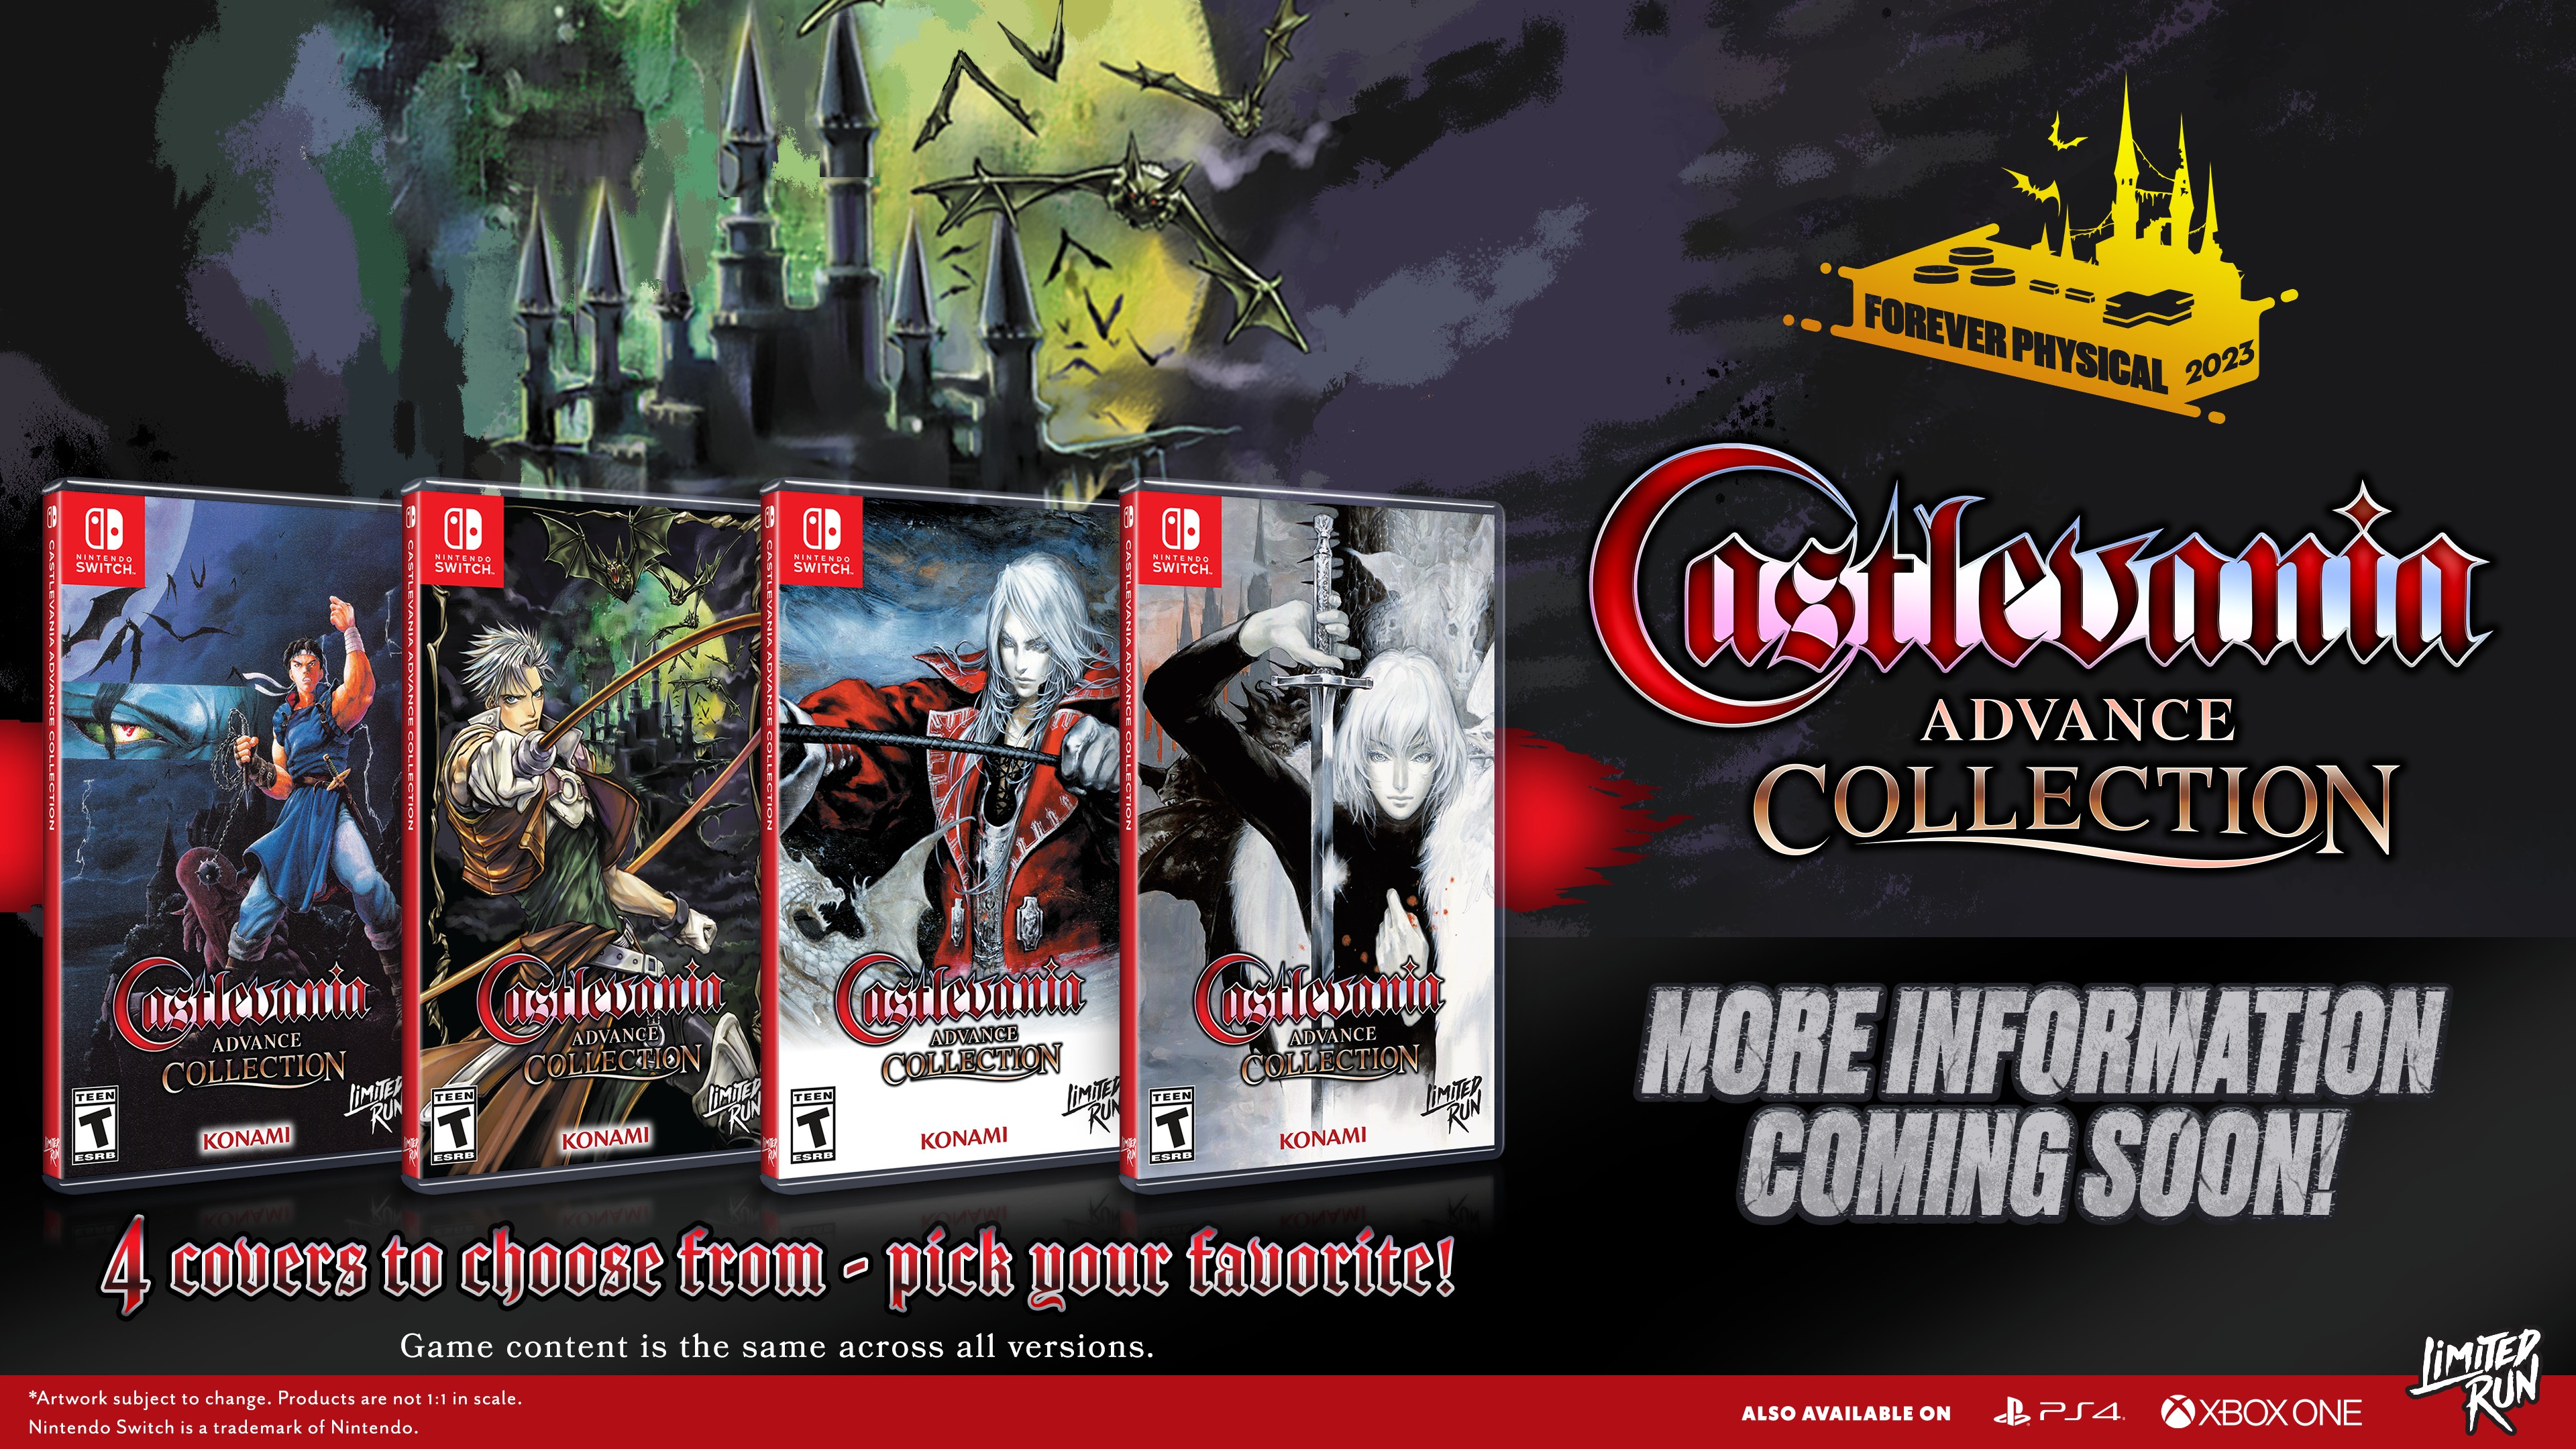 Limited Run Games announced Castlevania Advance Collection physical copies for the Switch, PS4, and Xbox One.